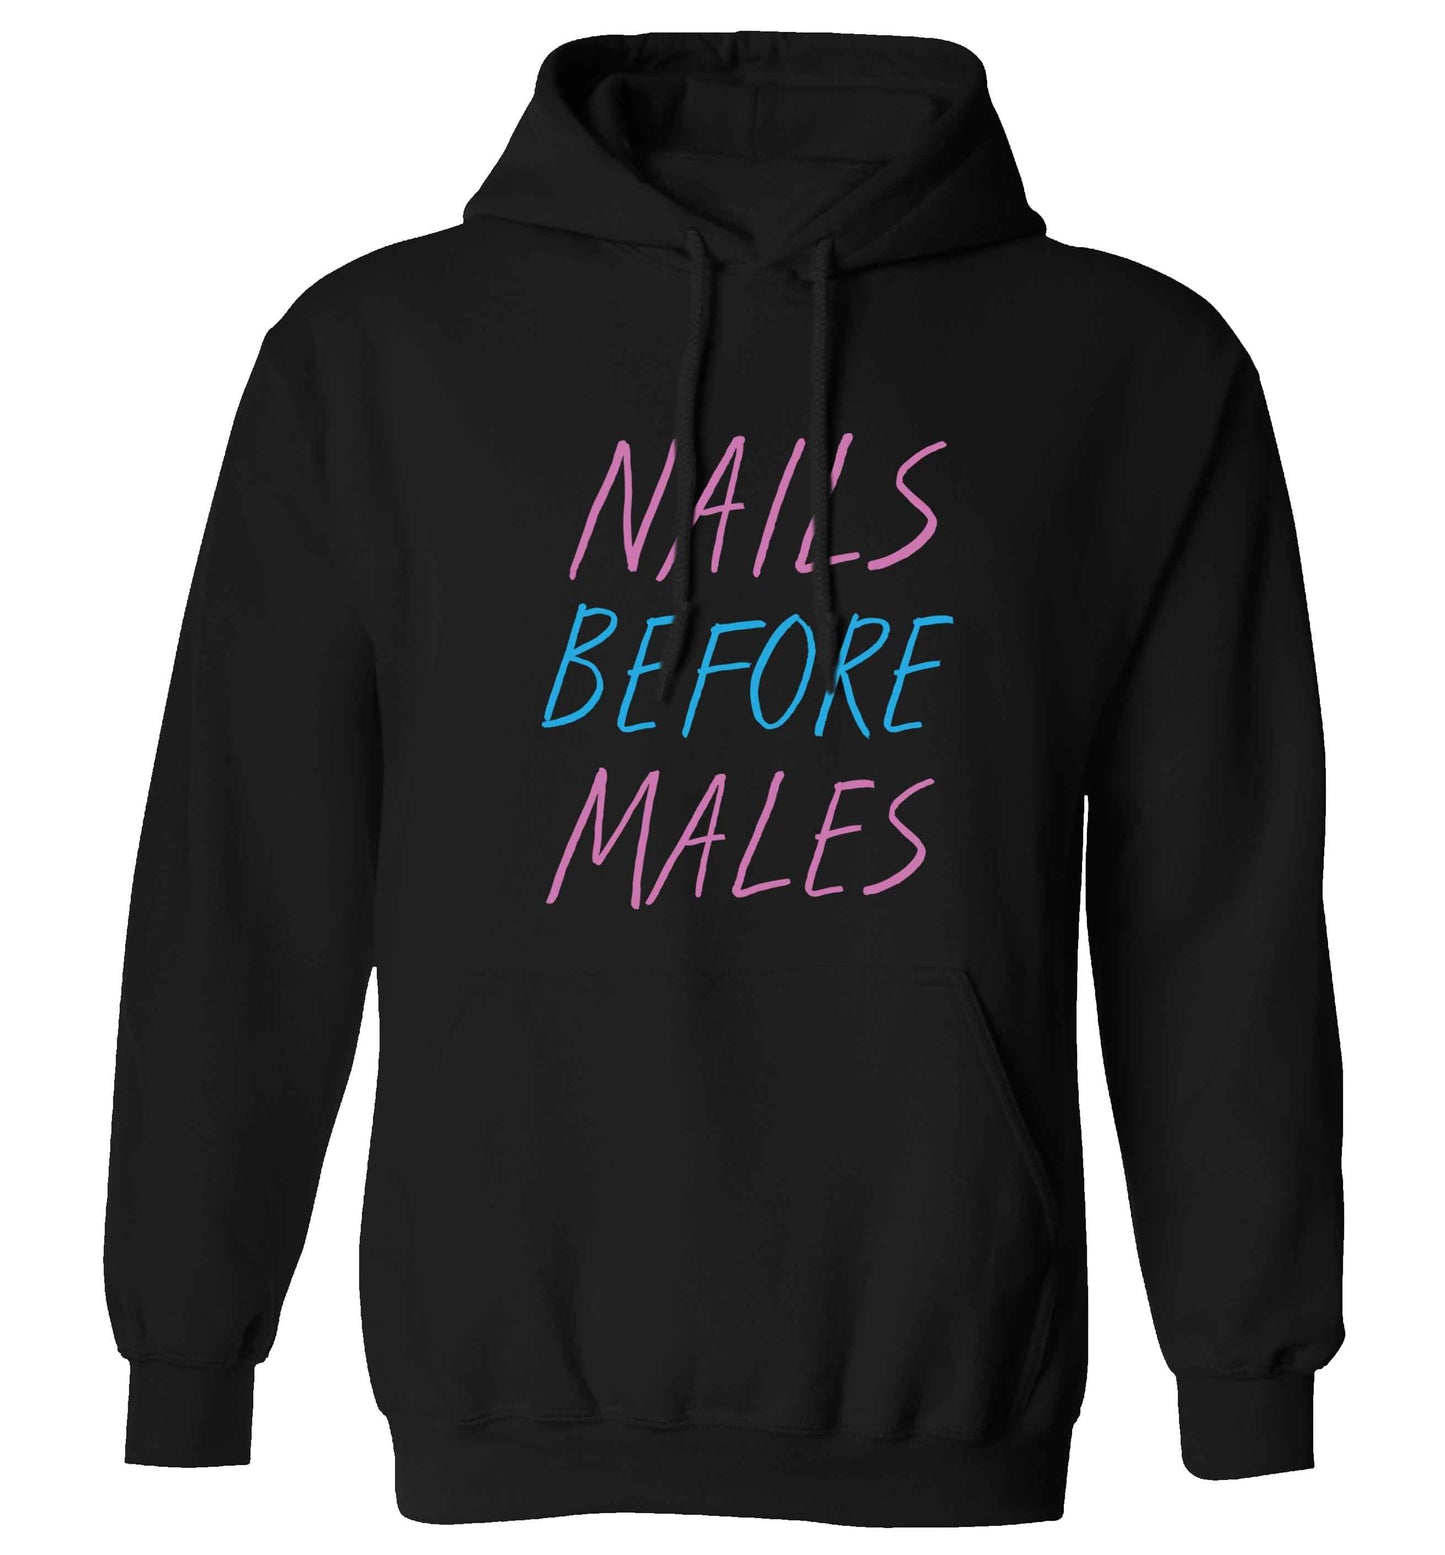 Nails before males adults unisex black hoodie 2XL